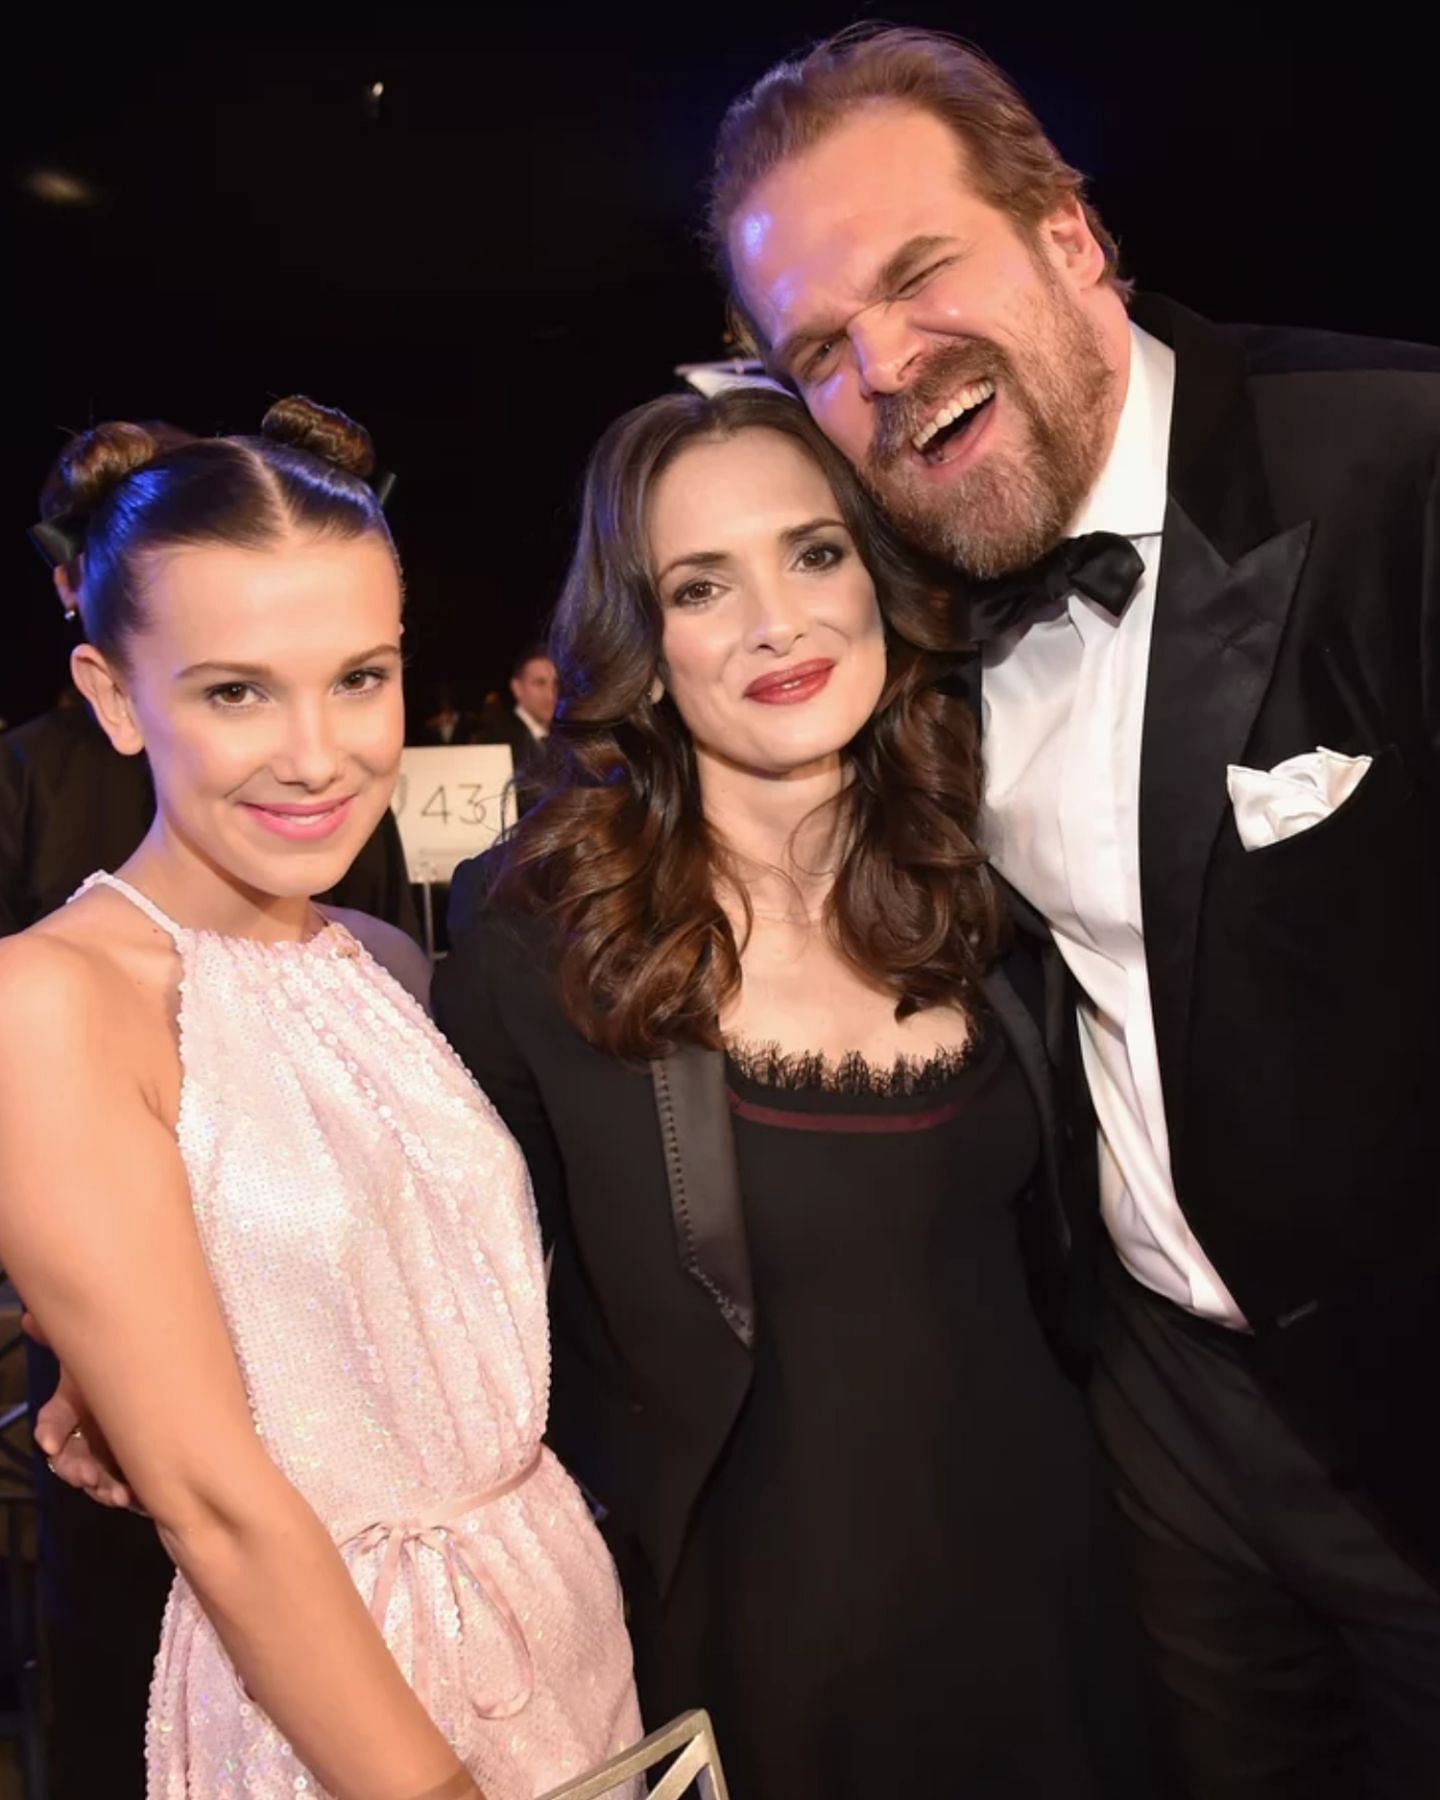 Millie Bobby Brown with Winona Ryder and David Harbour at the 2018 SAG Awards (Image via Getty Images)